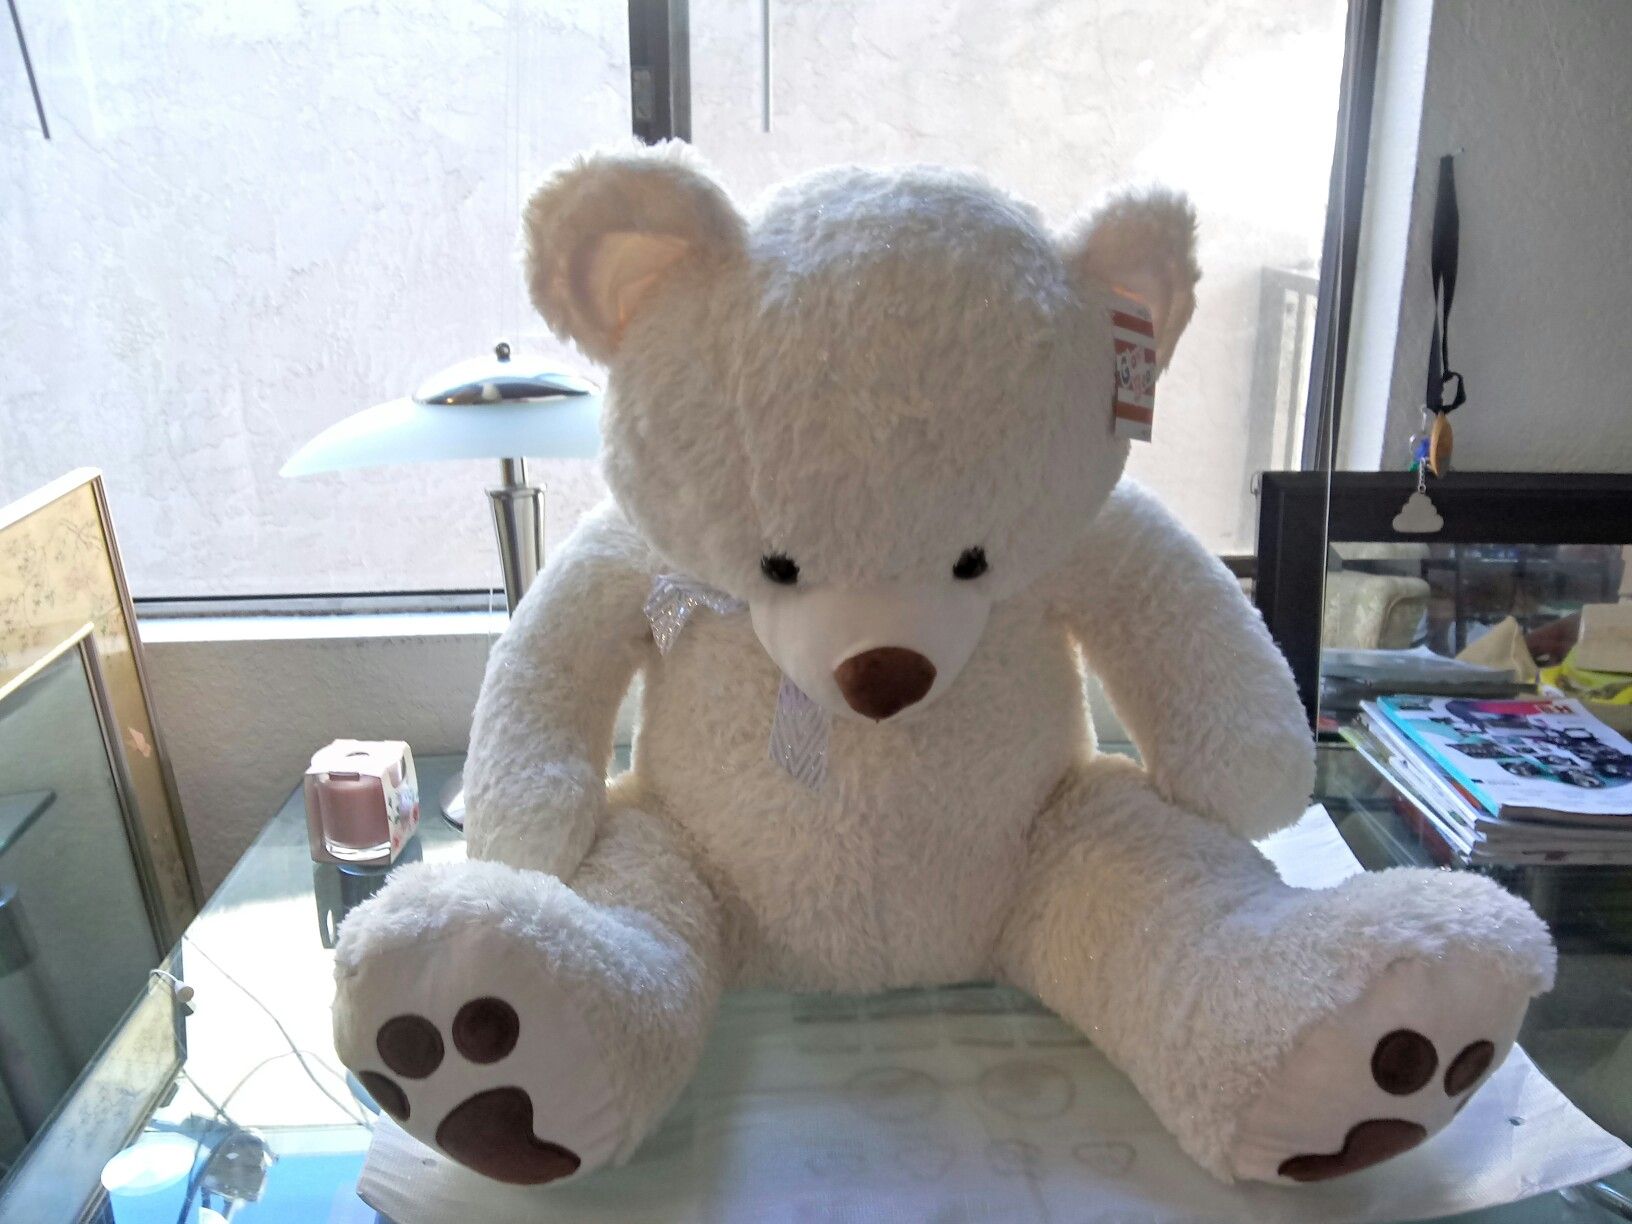 Best Made Toy Plush Teddy Bear White with Sliver "3 *New*